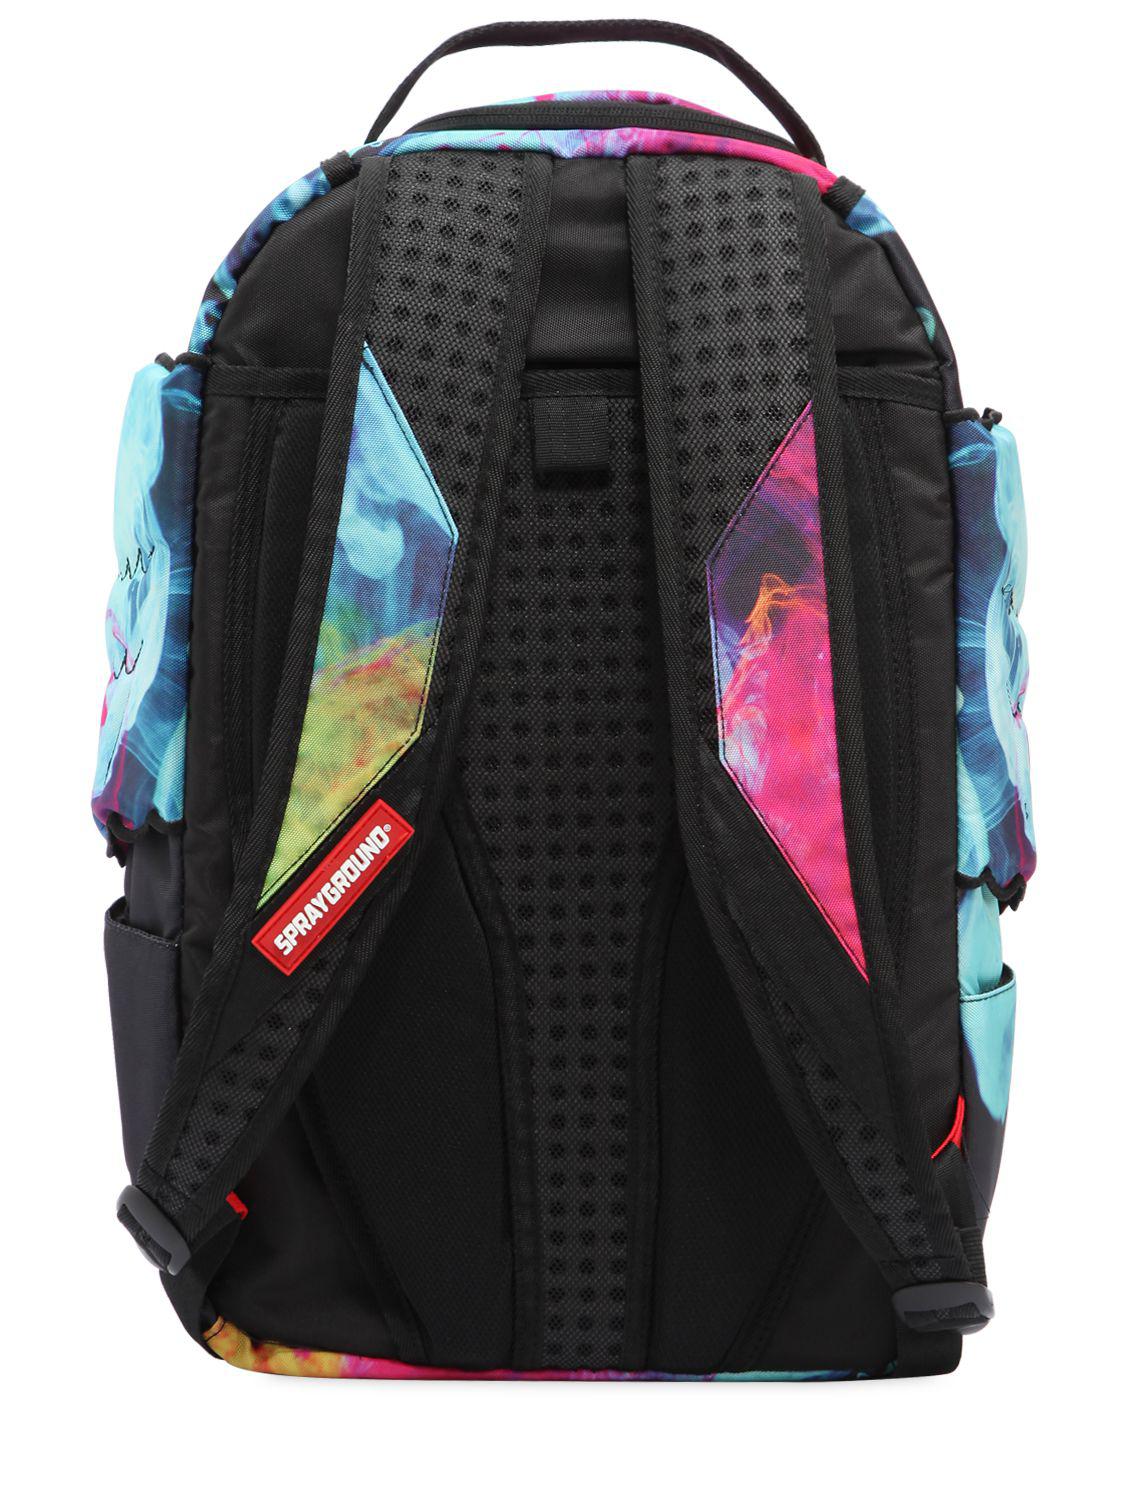 Sprayground Tripppy Wings Backpack - Lyst